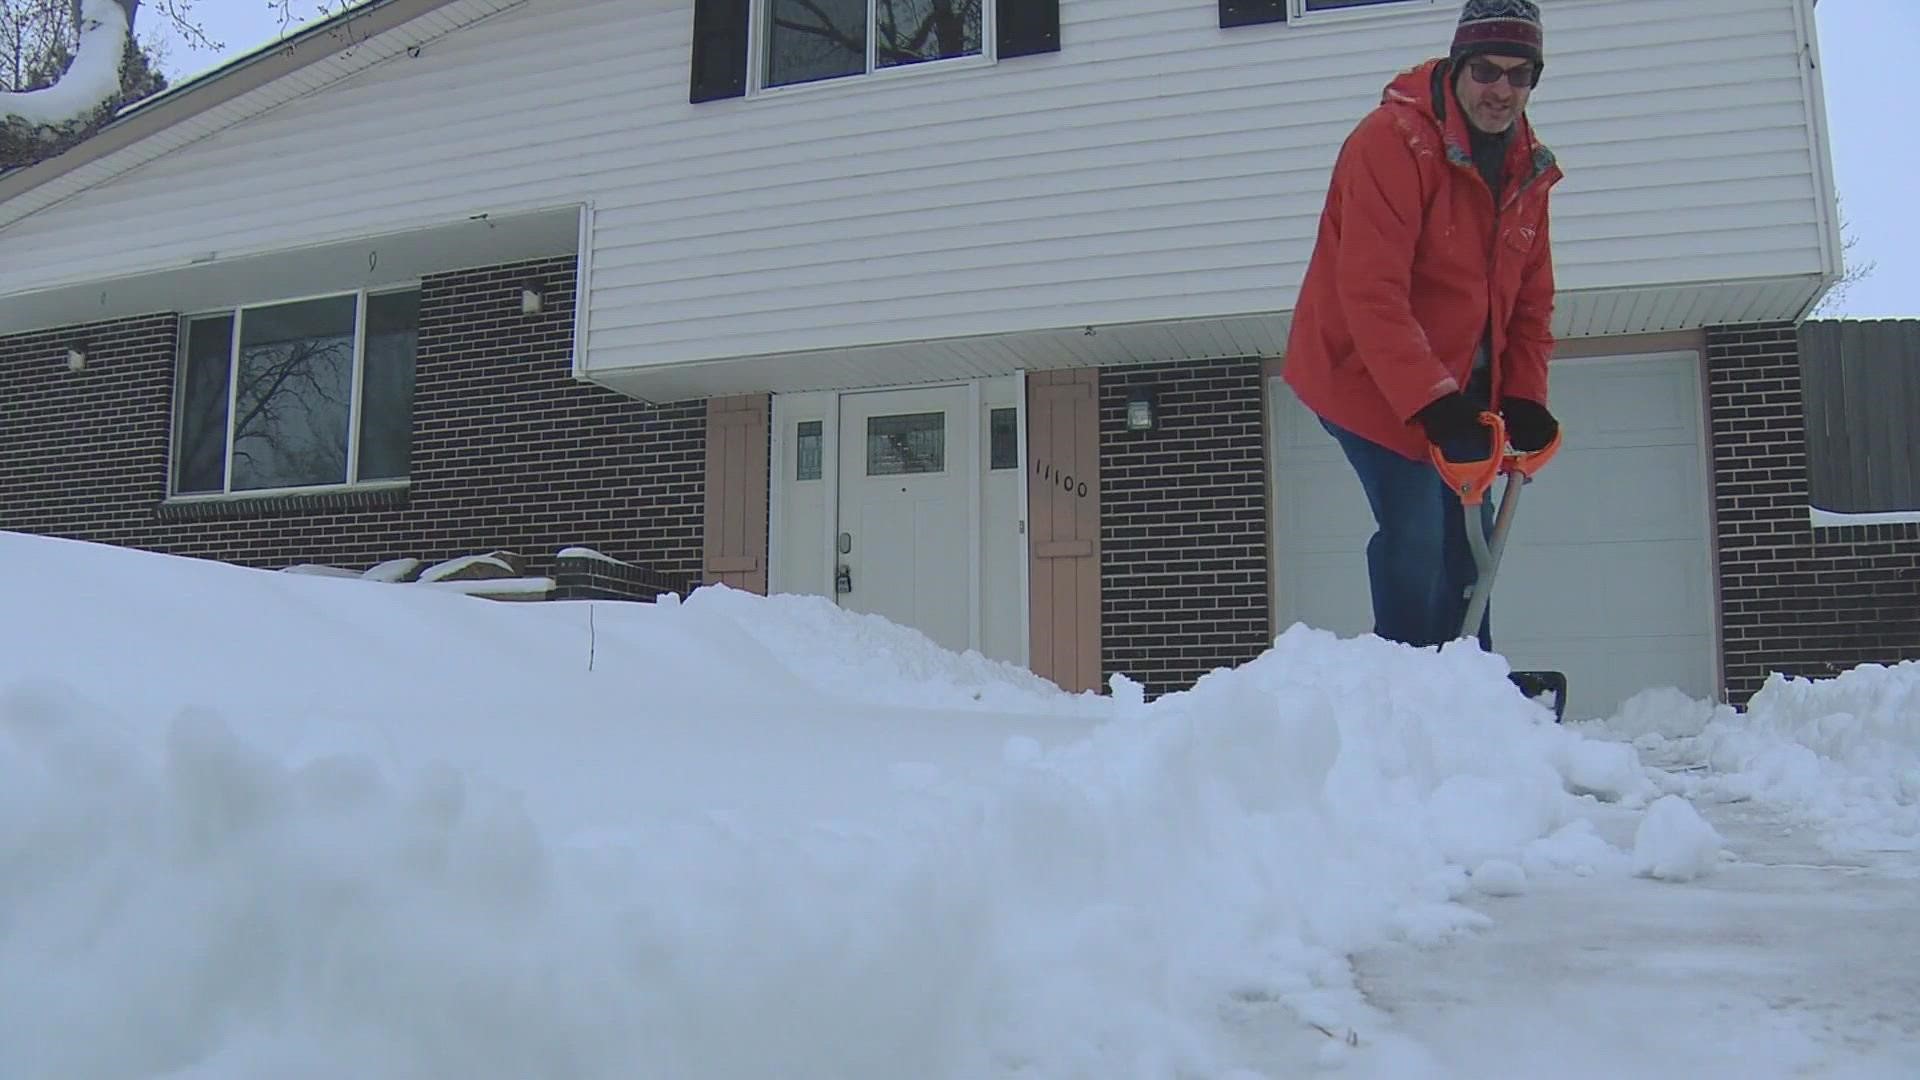 Colorado neighbors help each other shovel snow. What would you do for your neighbor?